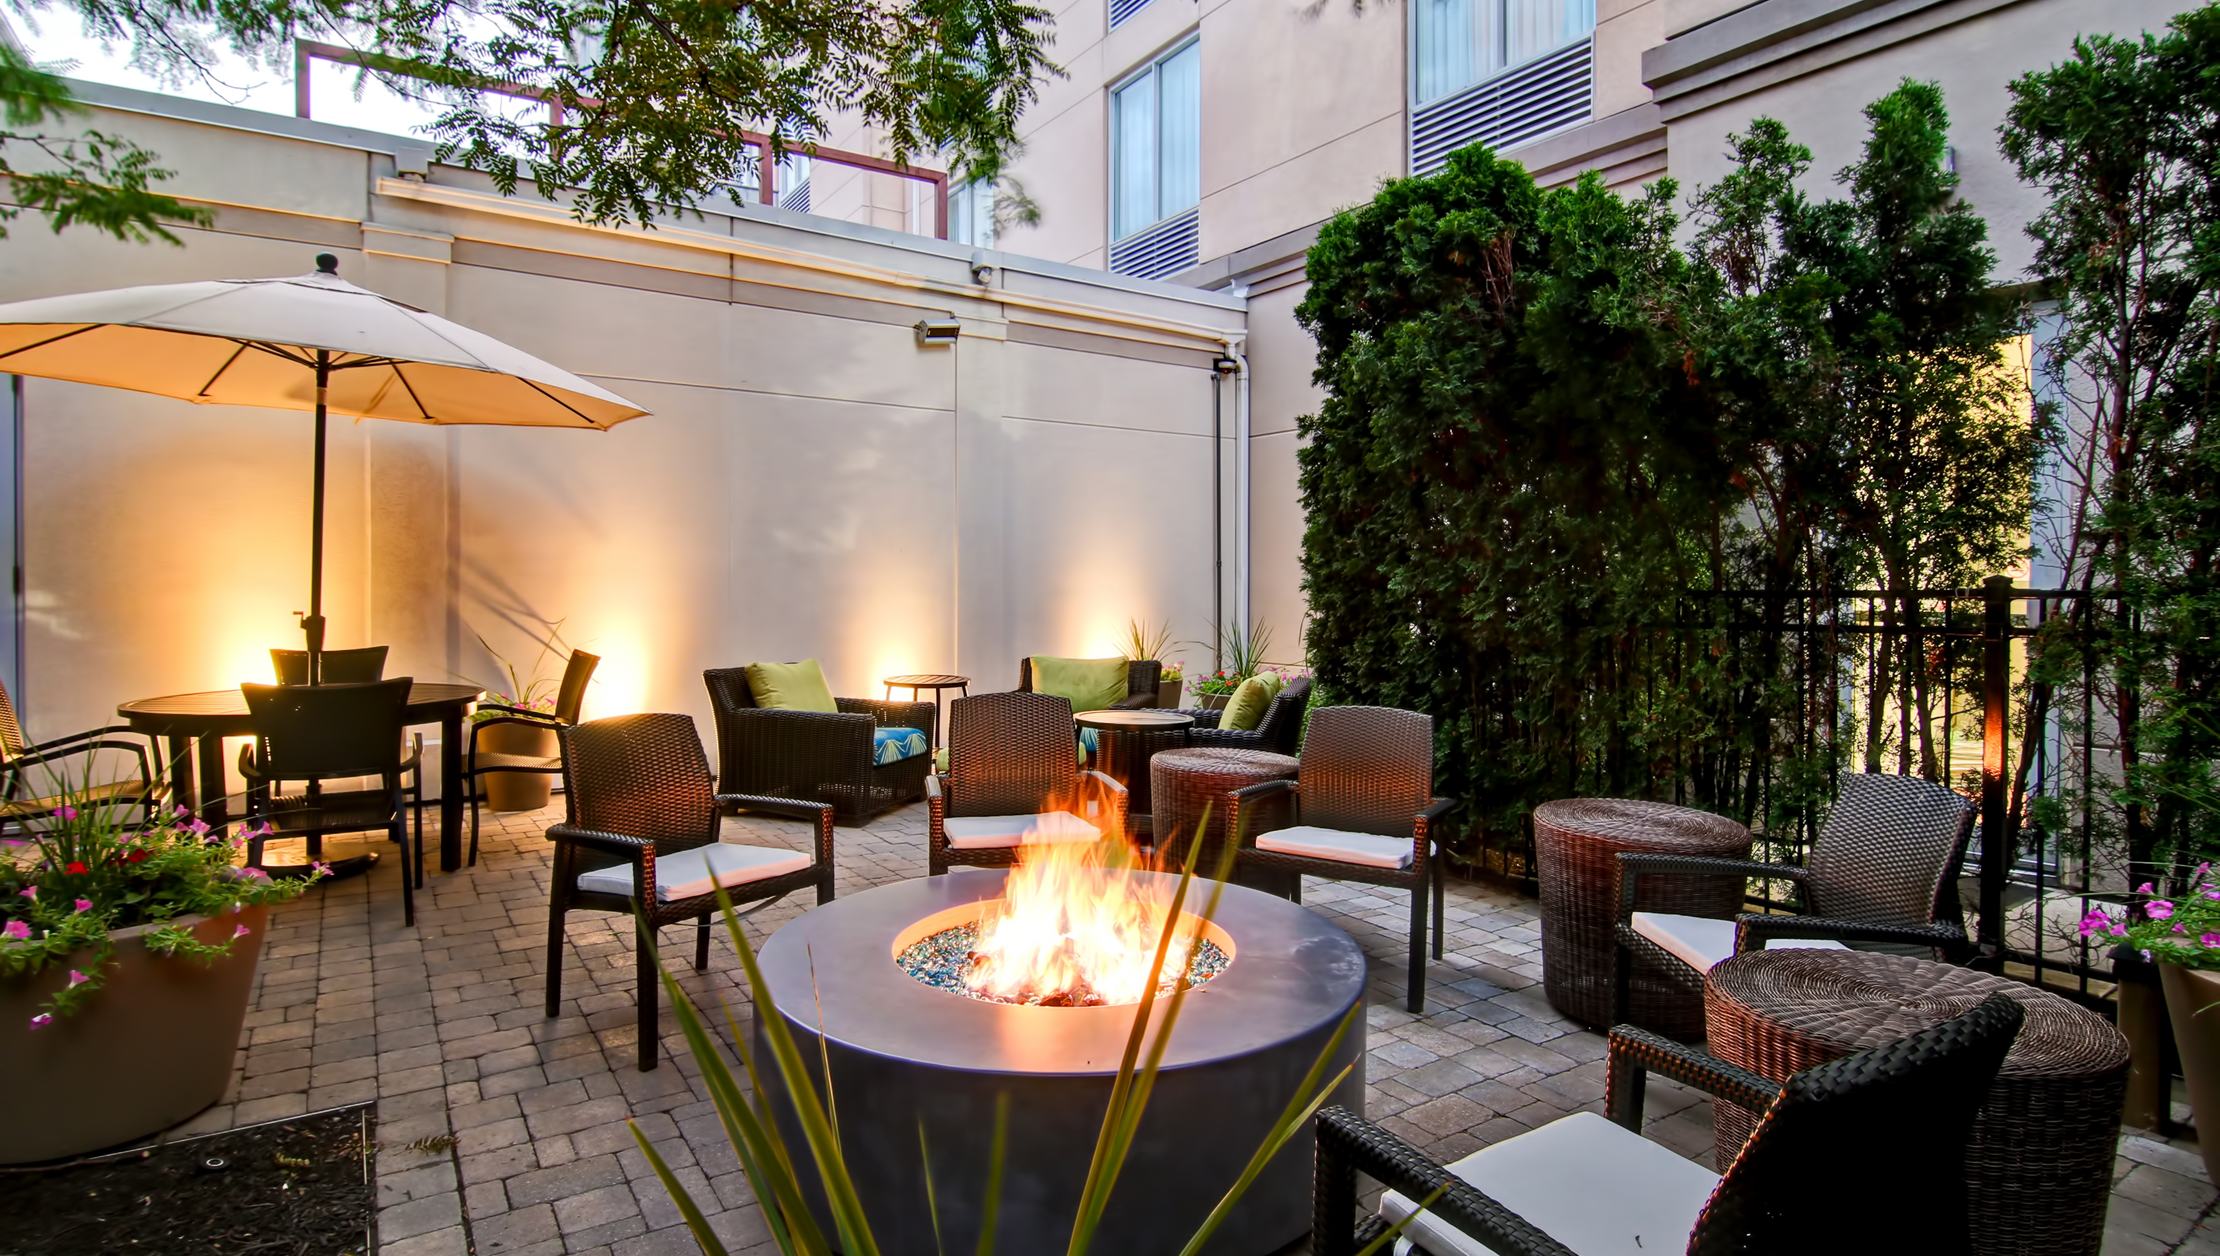 Photo of exterior patio with fire pit